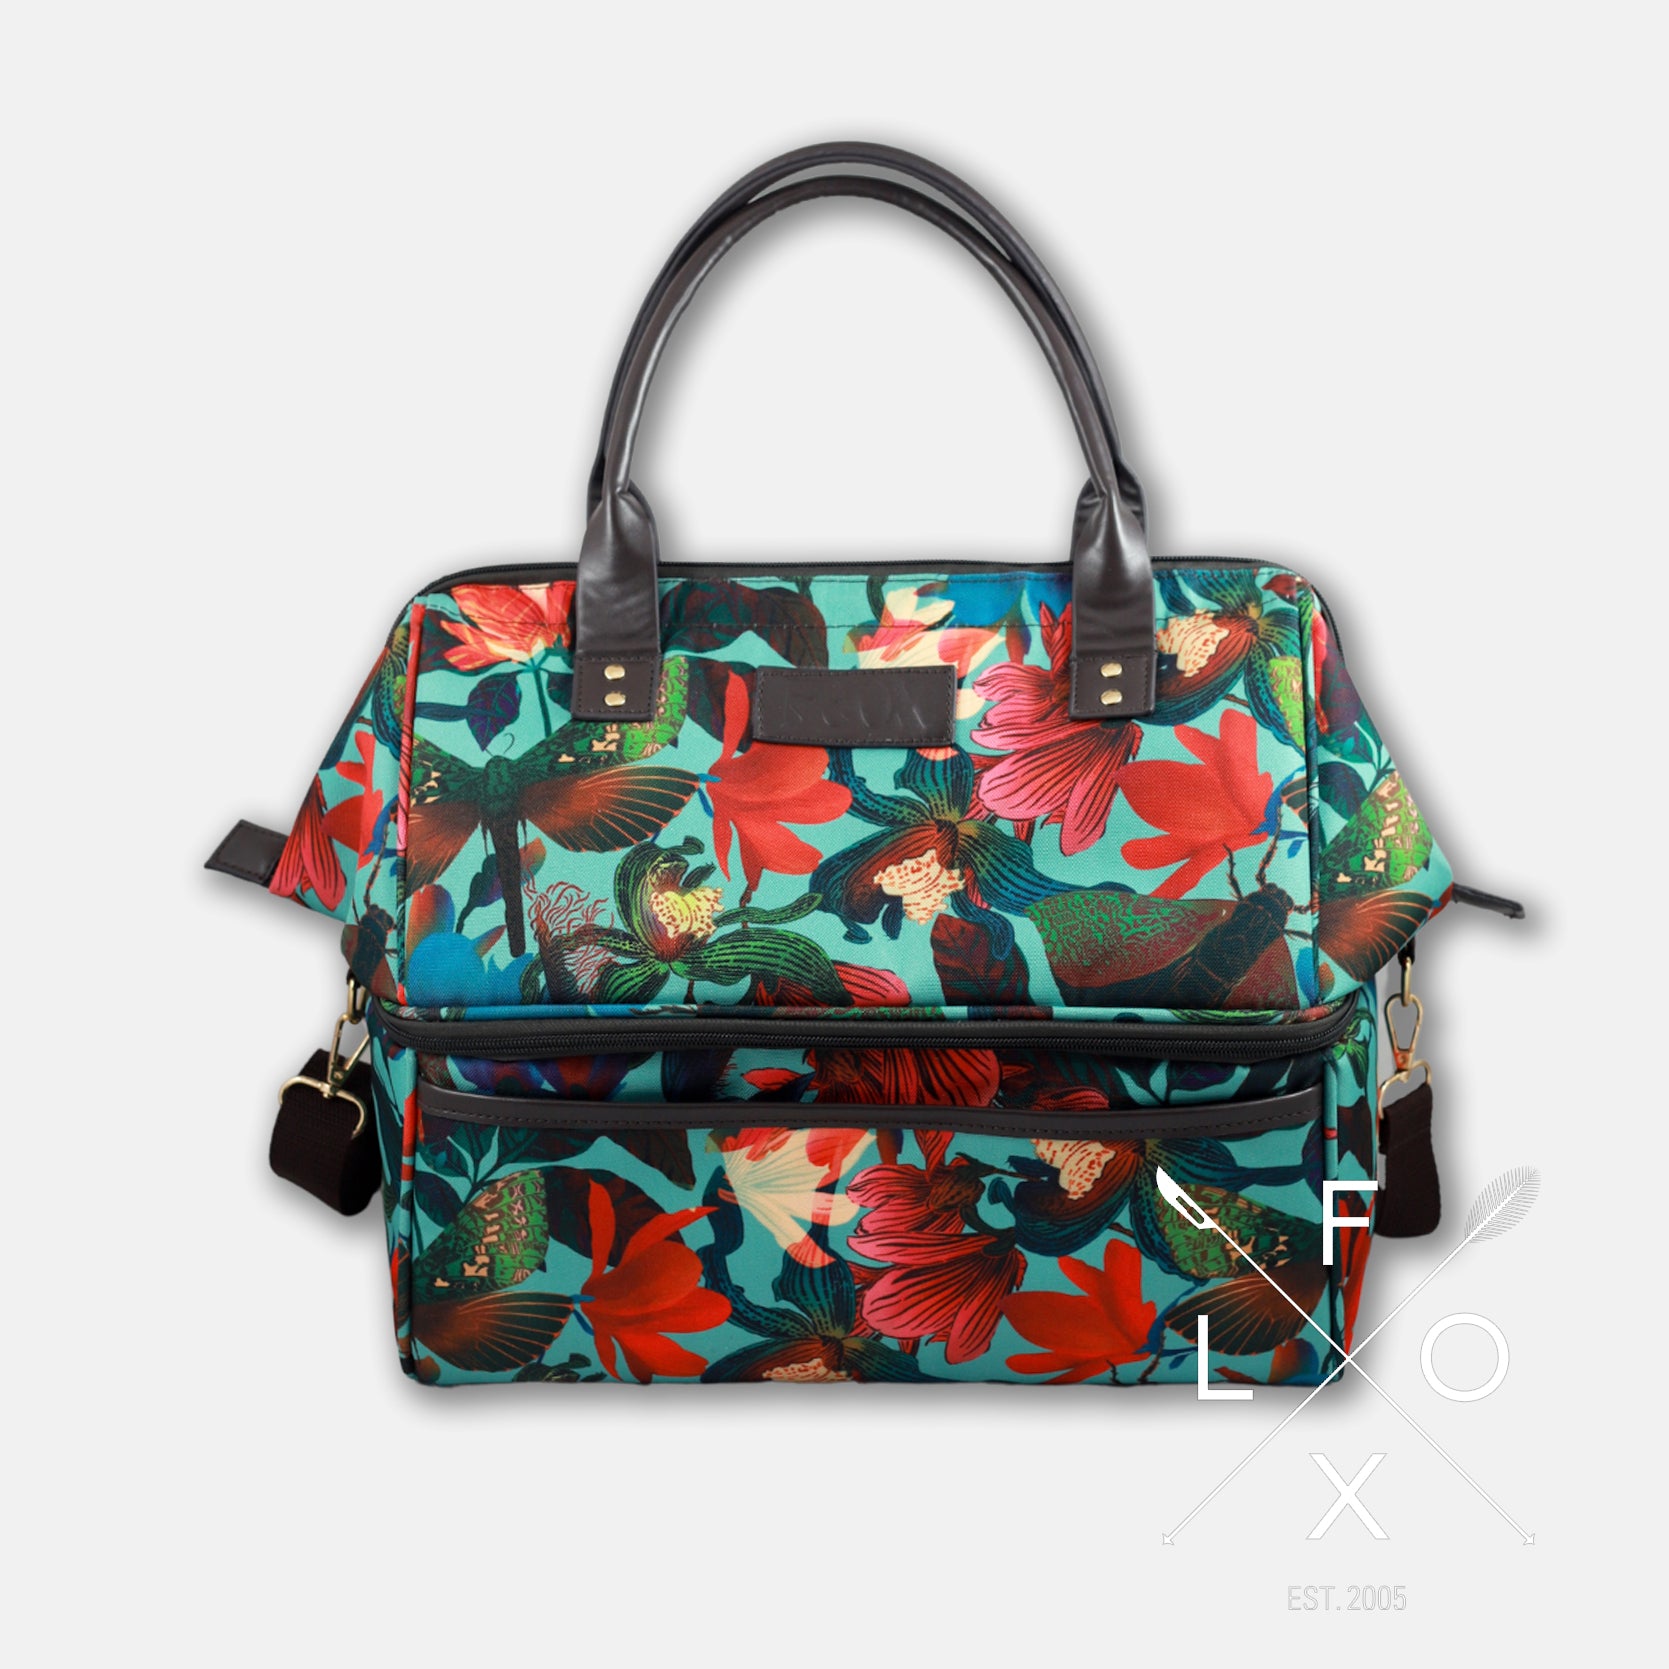 Colourful picnic cooler bag with teal blue background and magnolia flower print.